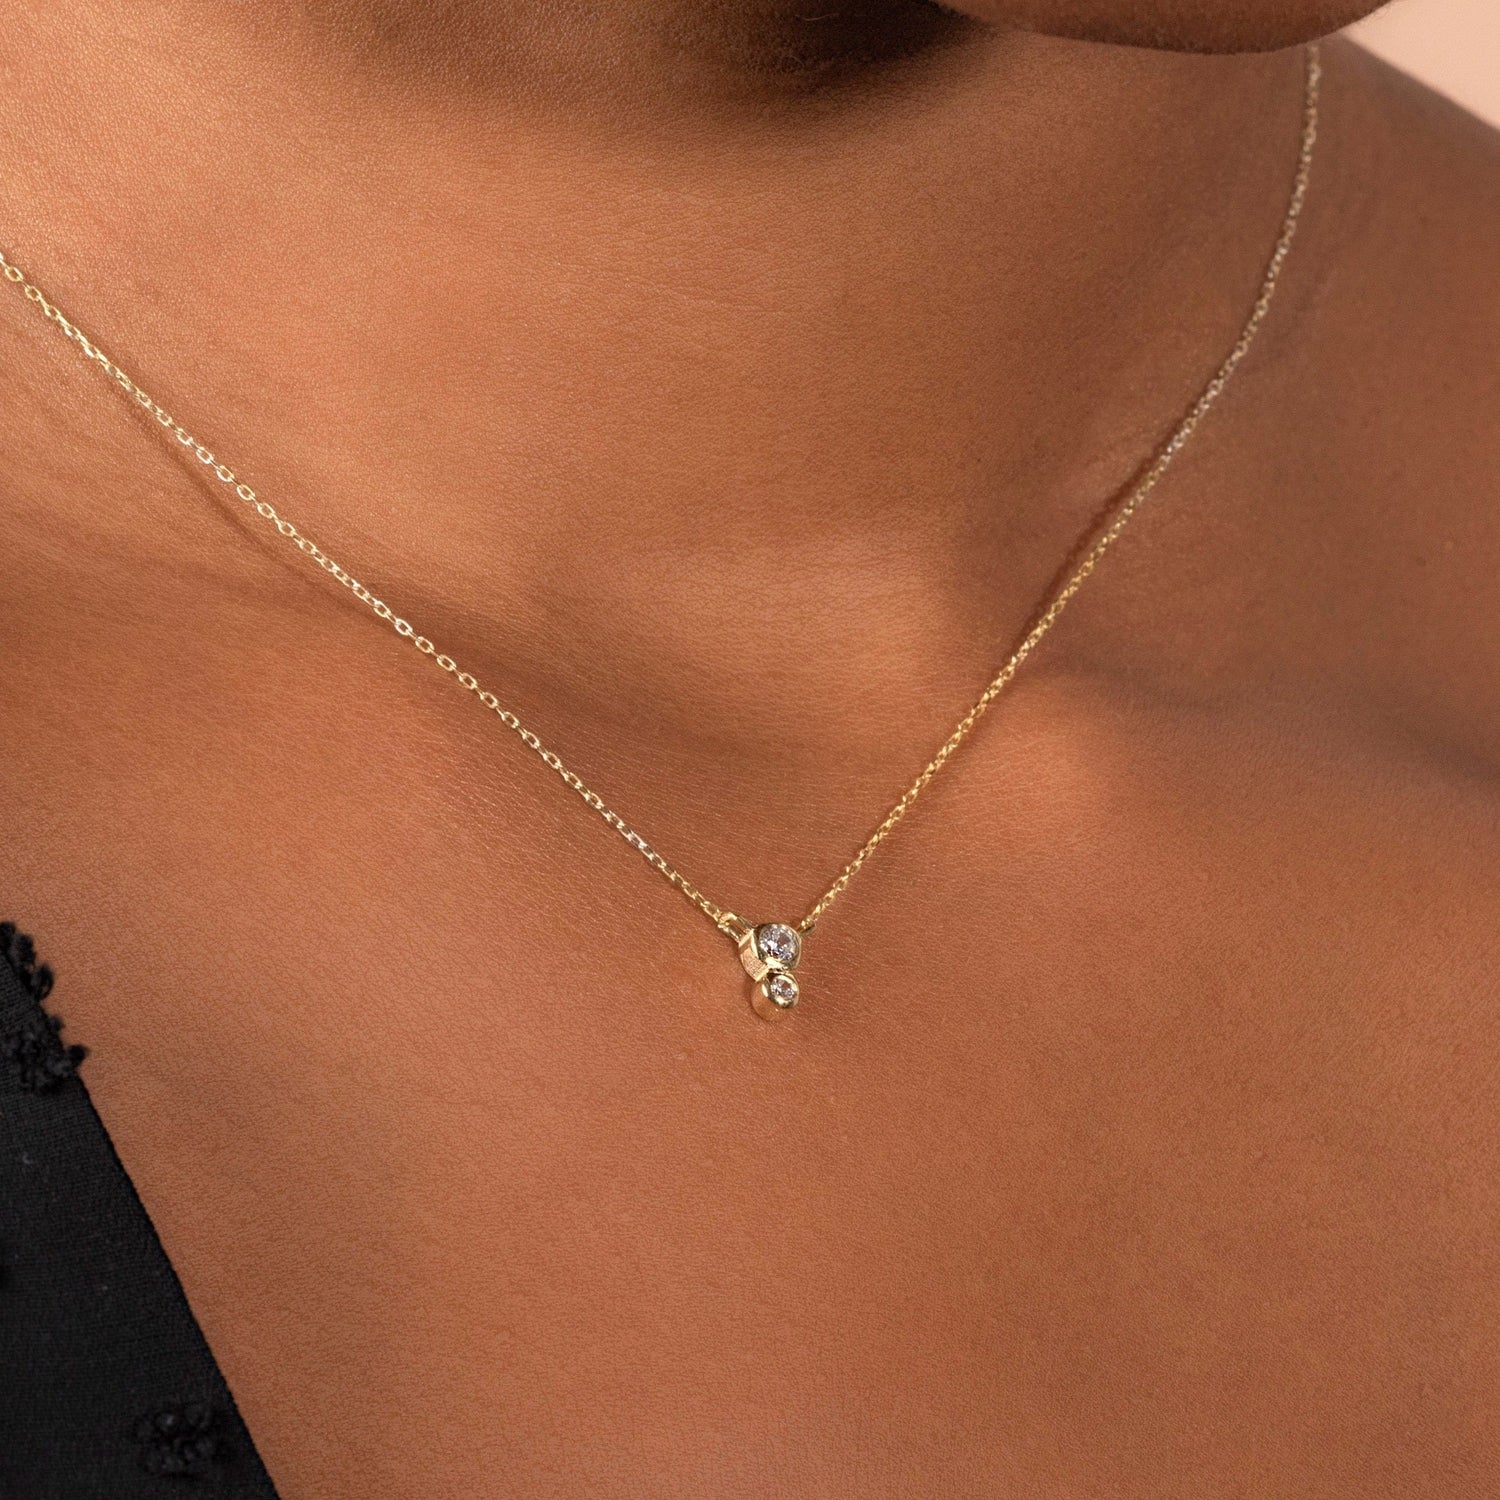 14k Gold Bezel Diamond Necklace, Solitaire Necklace with two Diamonds, Dainty Diamond Necklace, Unique Design wear it all-day every day